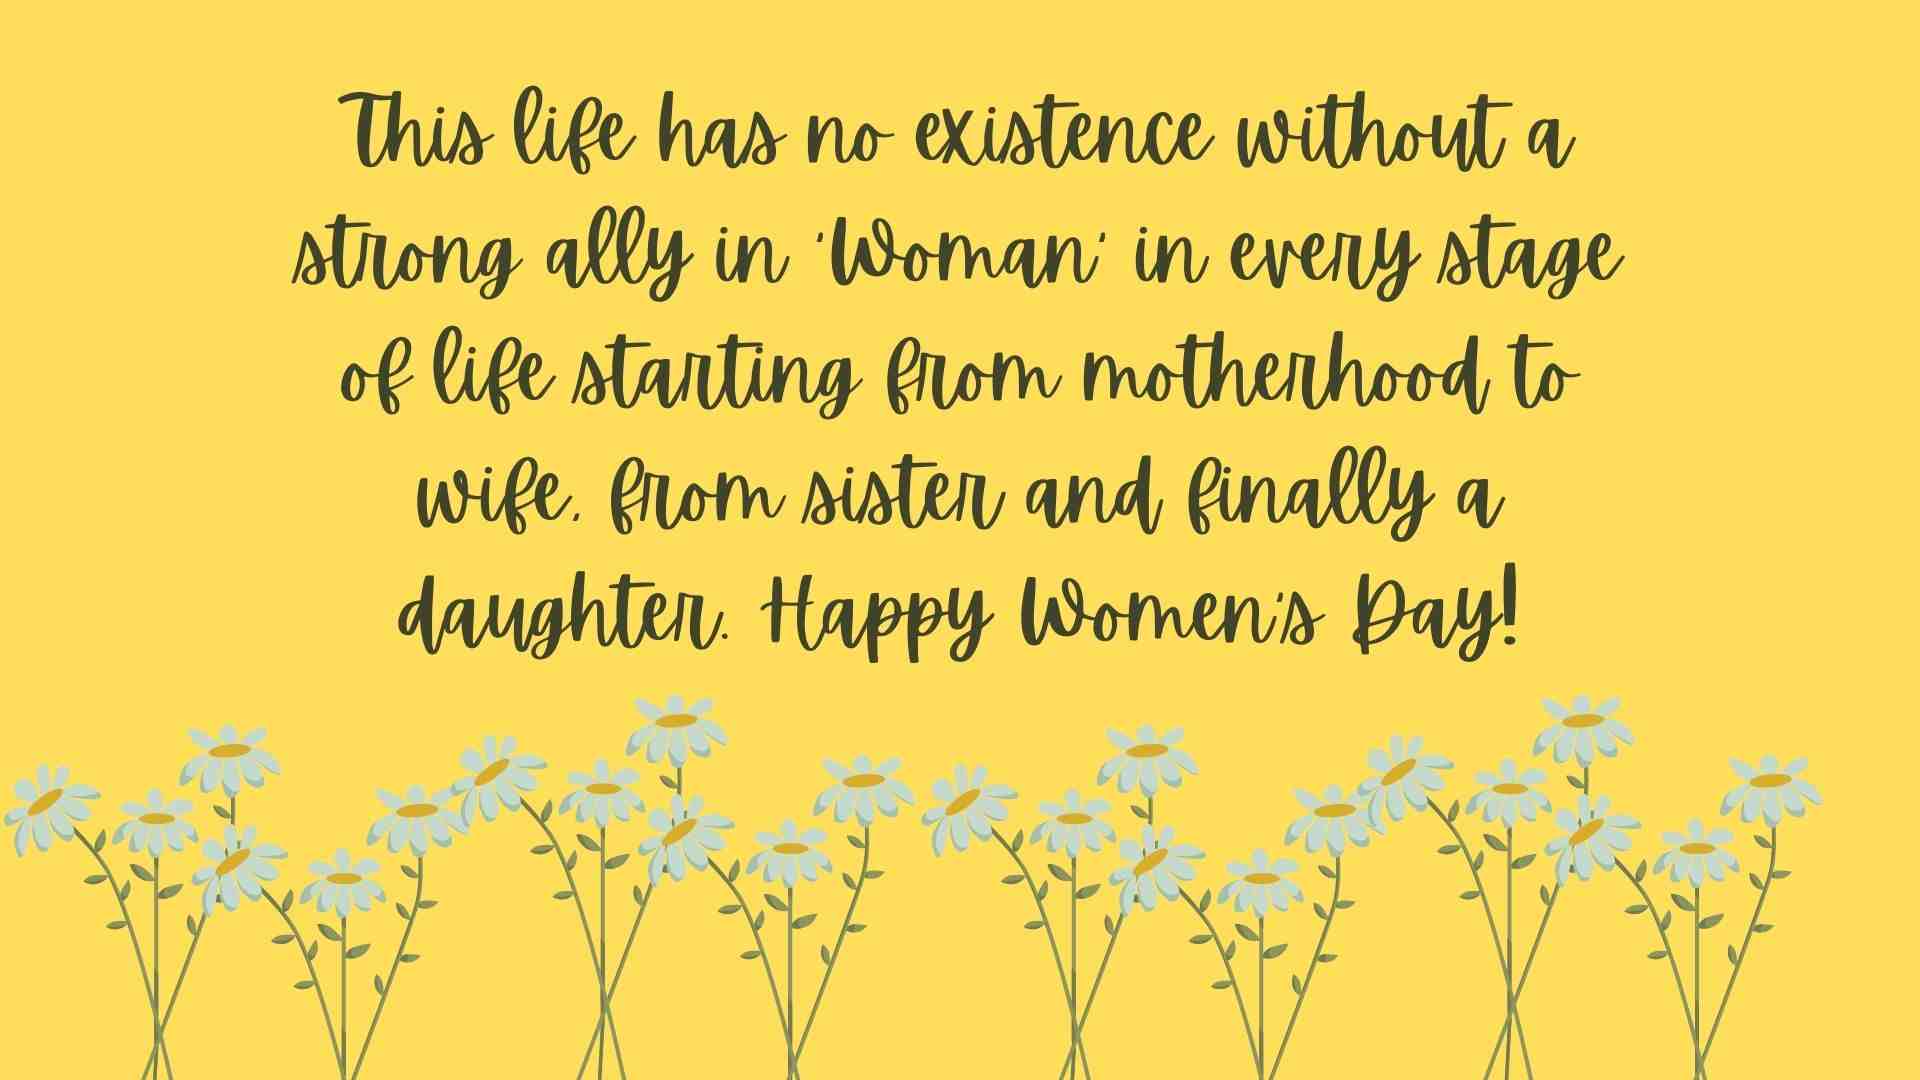 Happy Women's Day 2022 Wishes | Images with Quotations